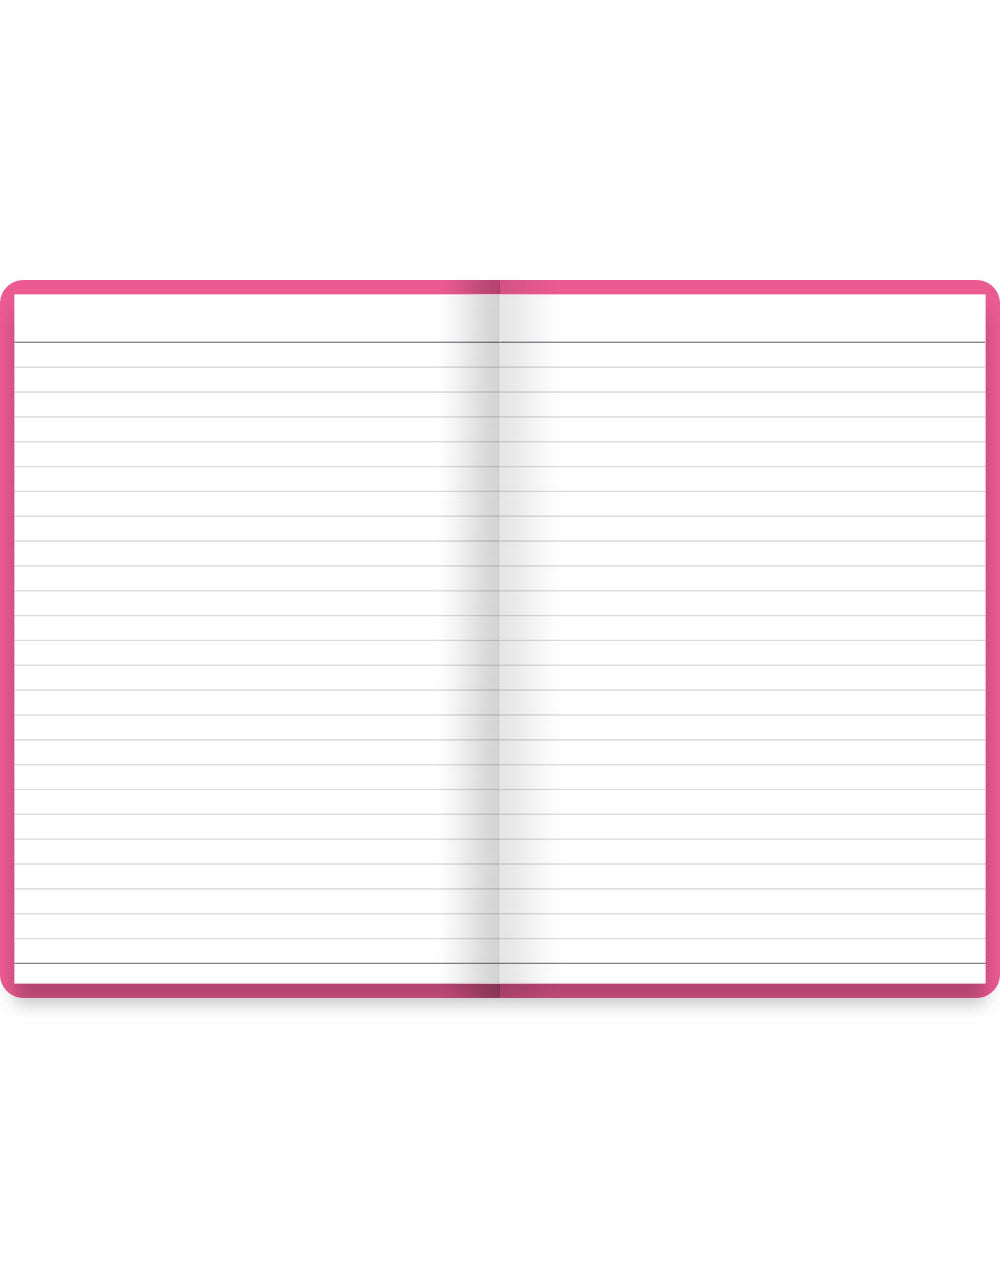 Dazzle A5 Address Book Pink#color_pink